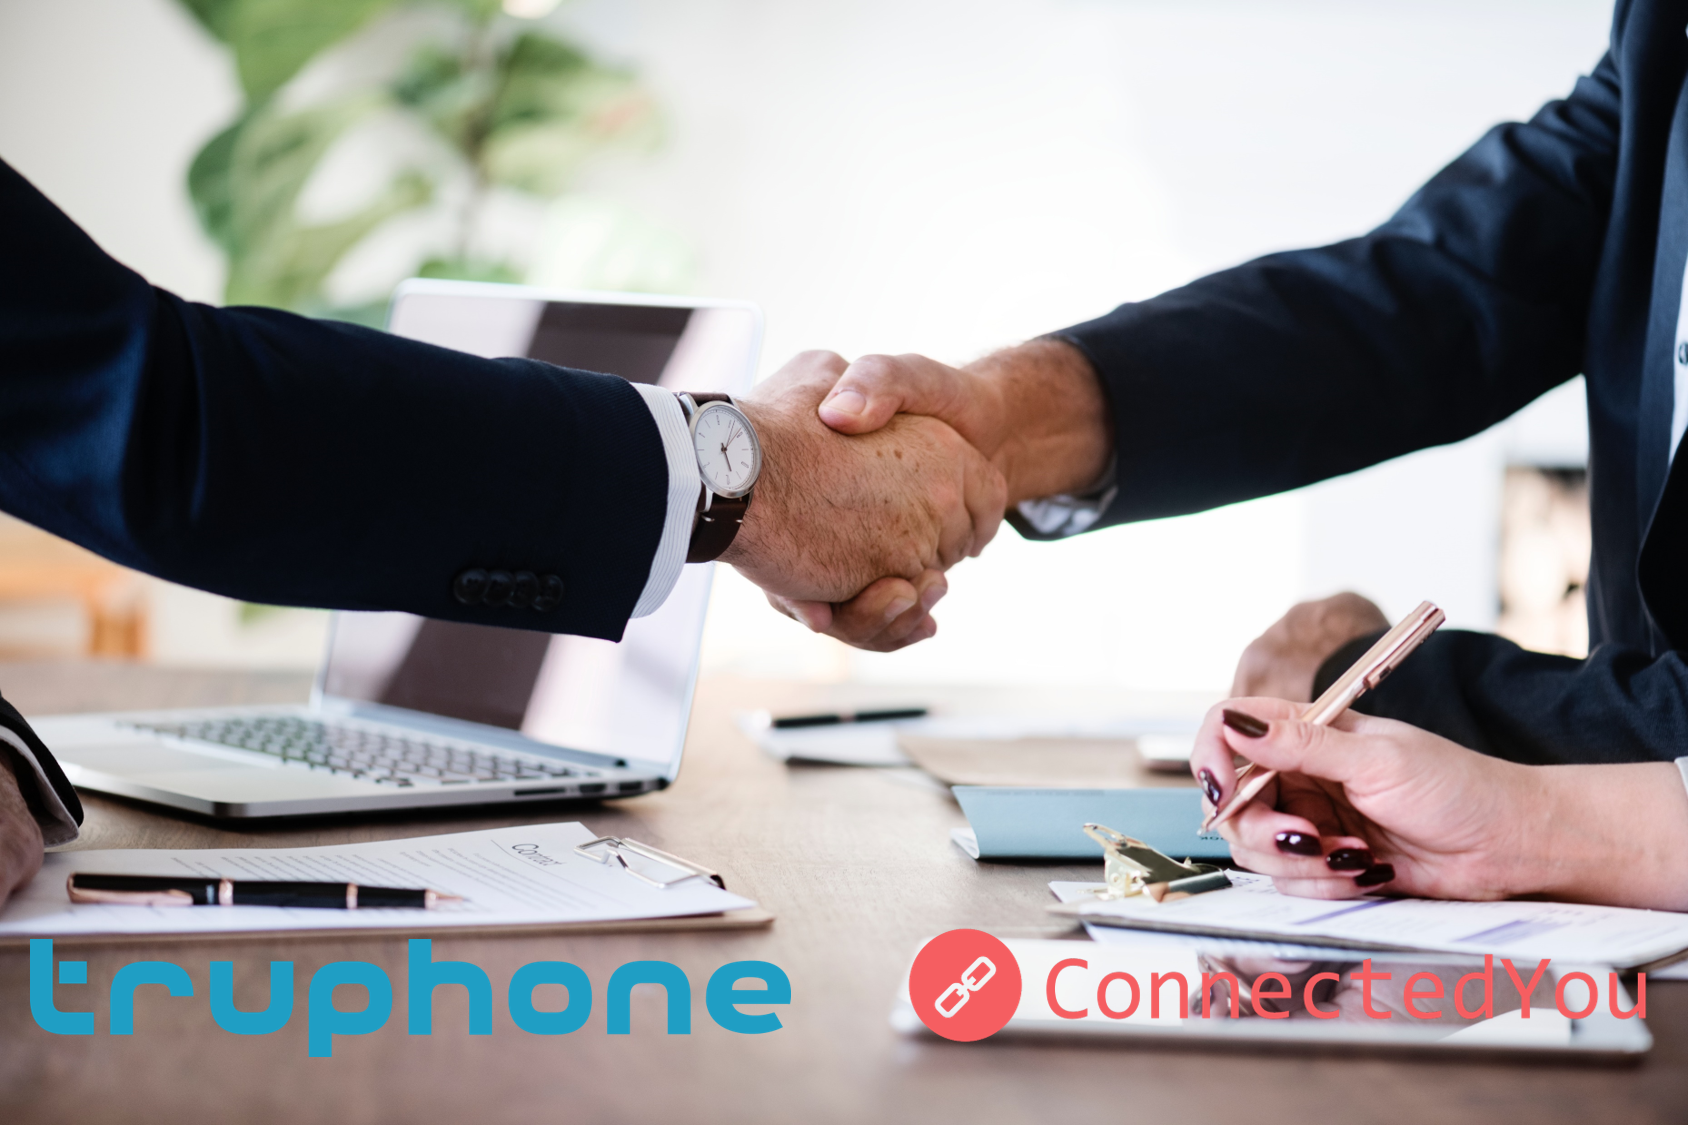 ConnectedYou and Truphone announce partnership to deliver a unique and global IoT service ecosystem